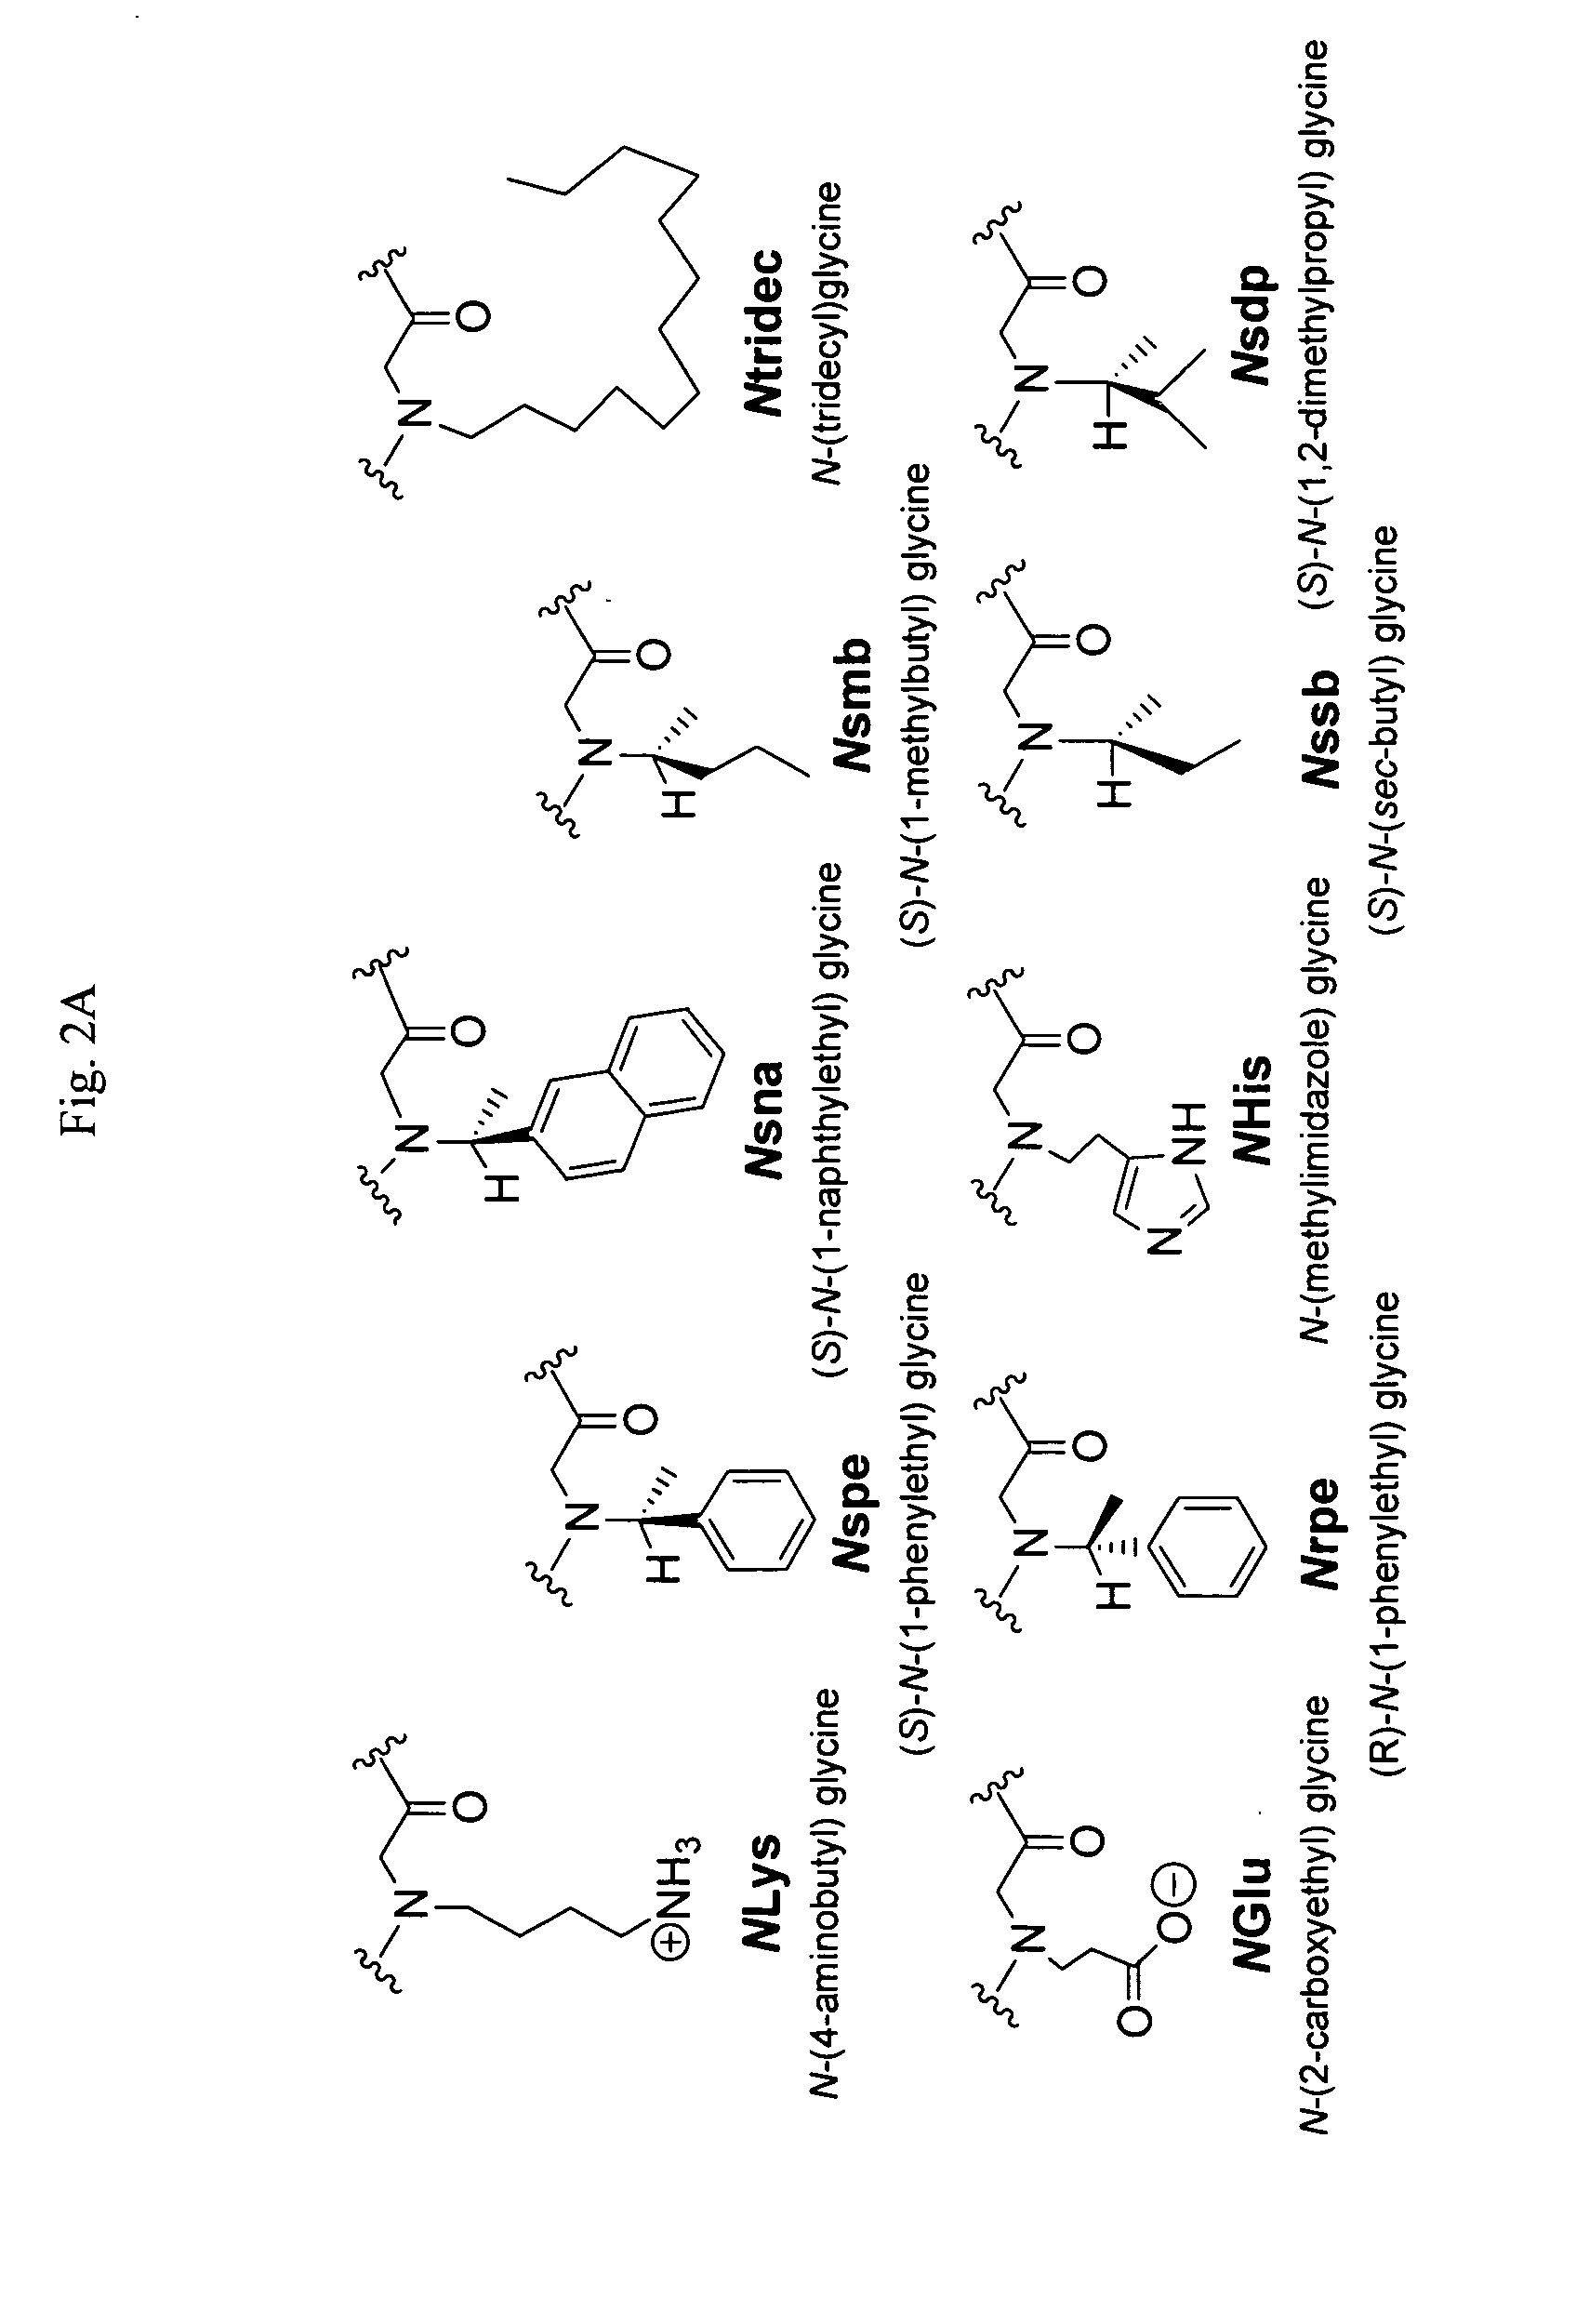 Alkylated sp-b peptoid compounds and related lung surfactant compositions